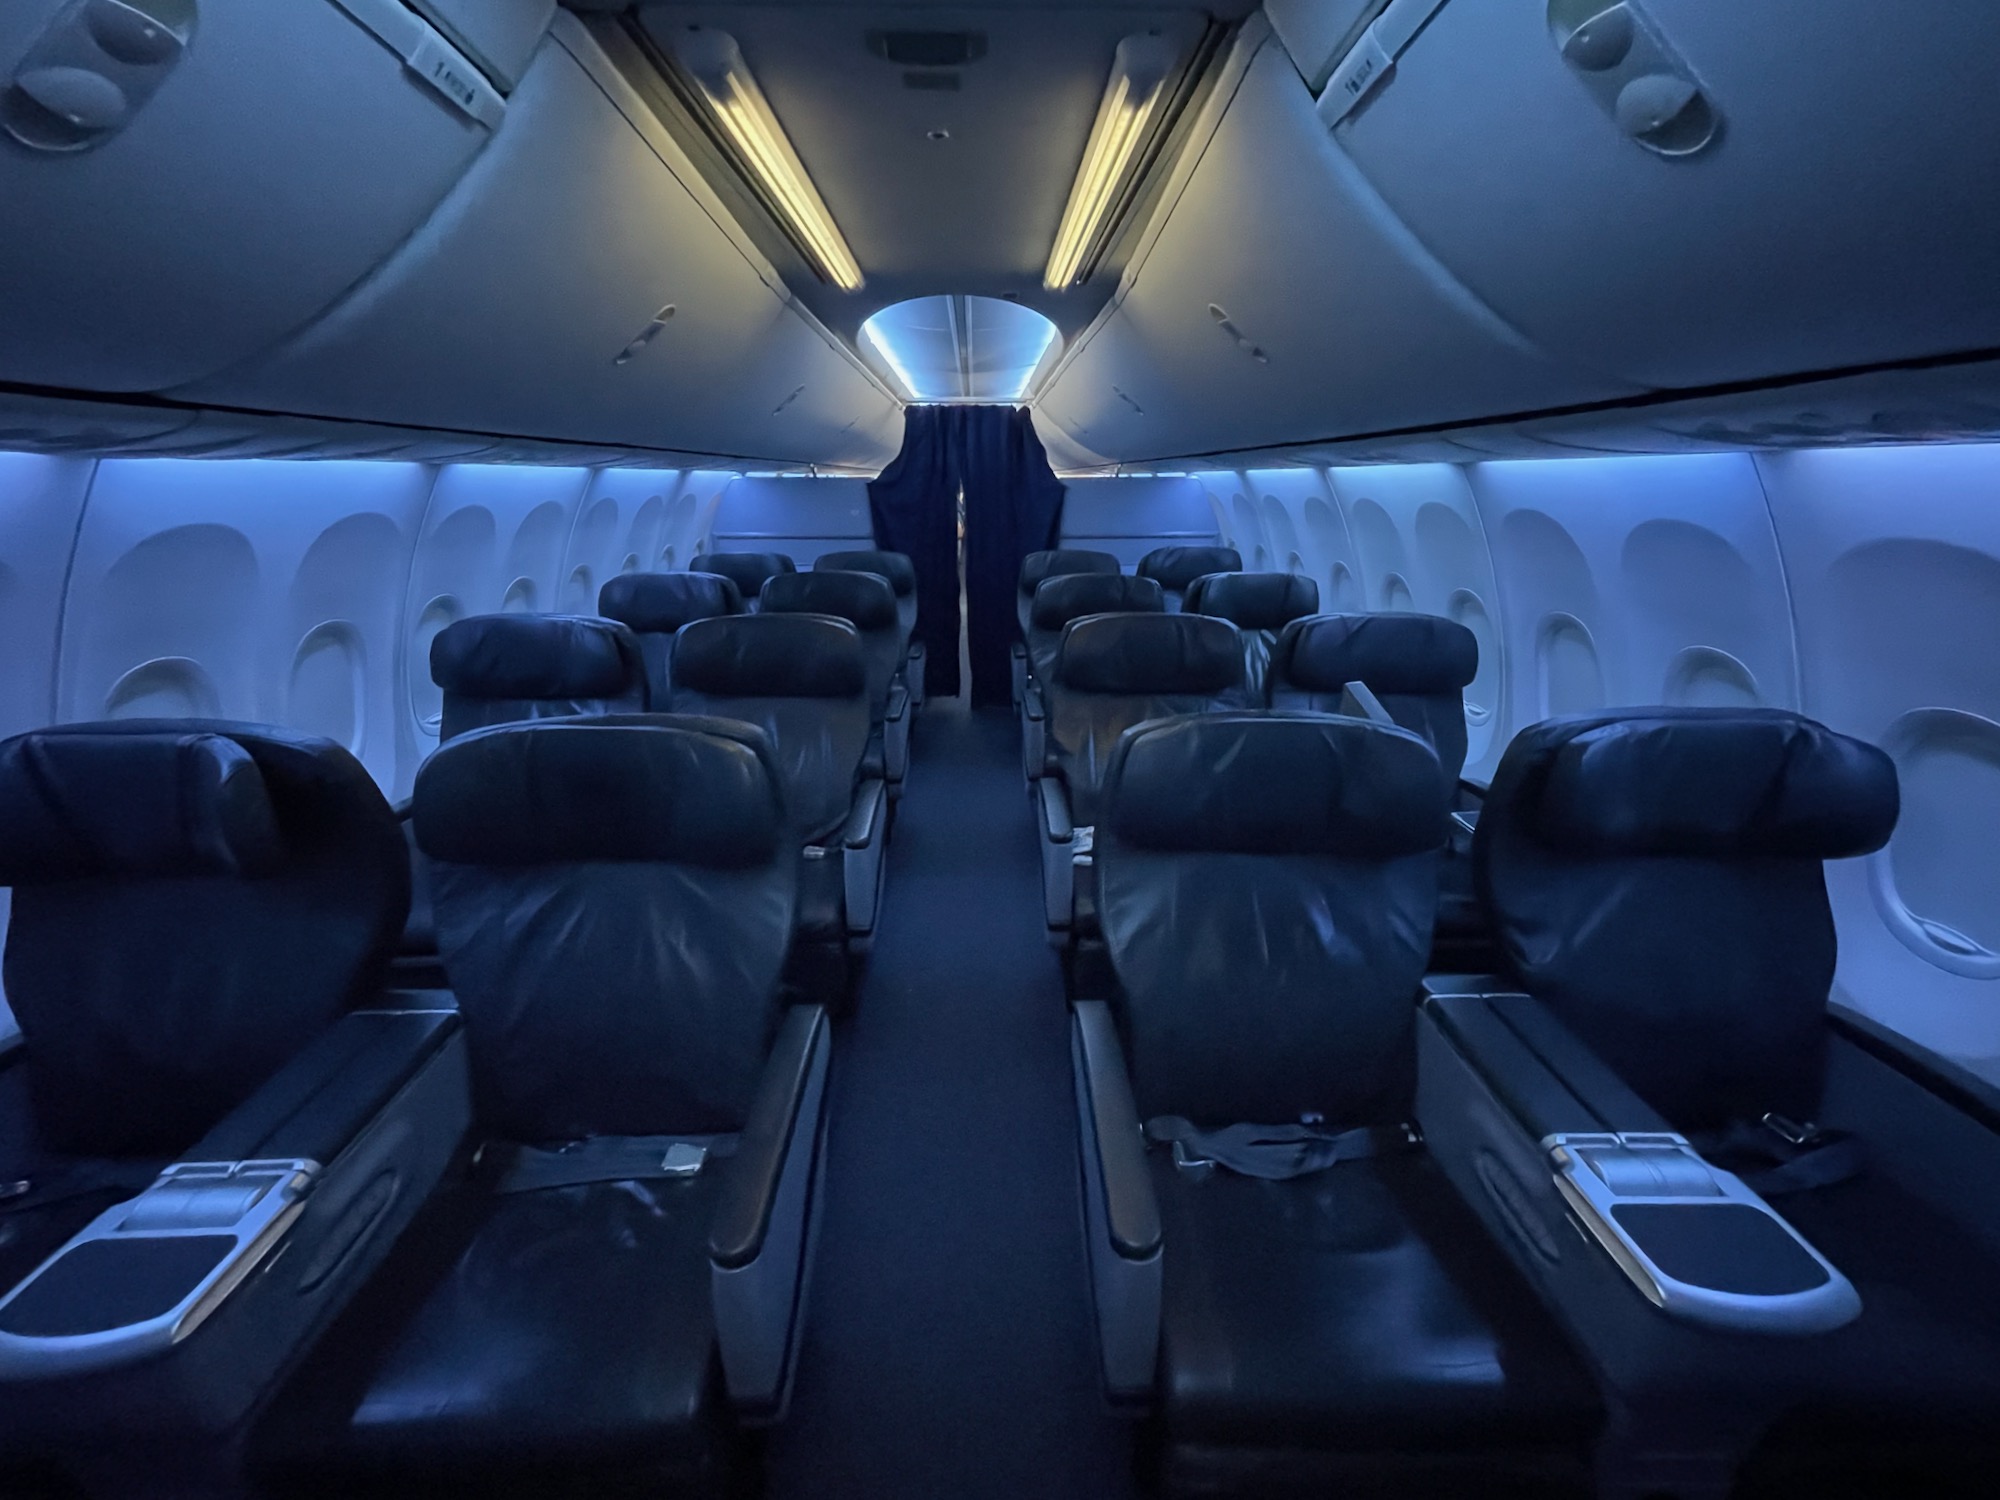 inside an airplane with seats